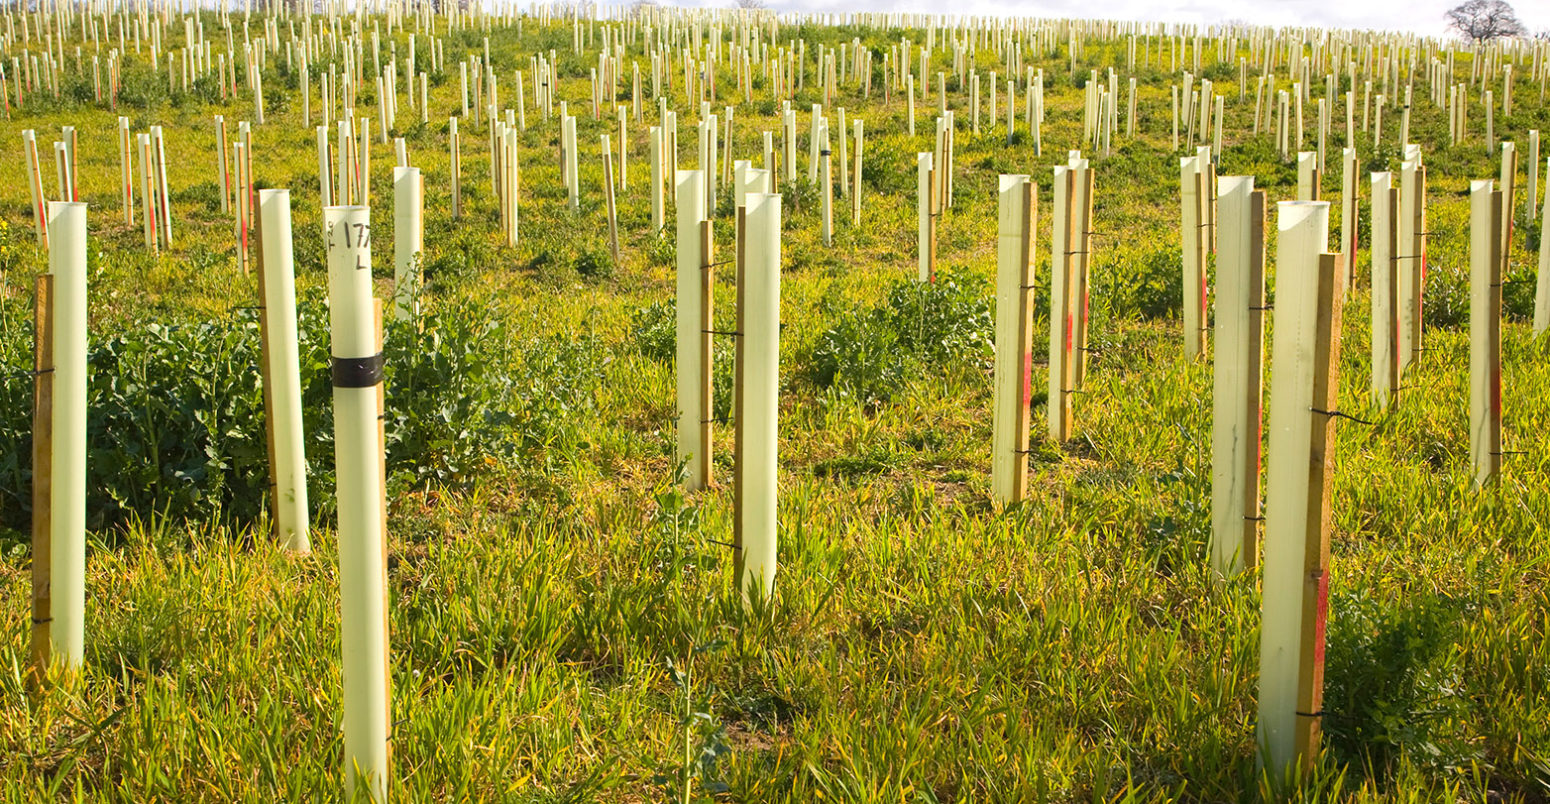 Newly planted field of trees in plastic protective tubes, Suffolk, UK. Credit: geogphotos / Alamy Stock Photo. CN10J3